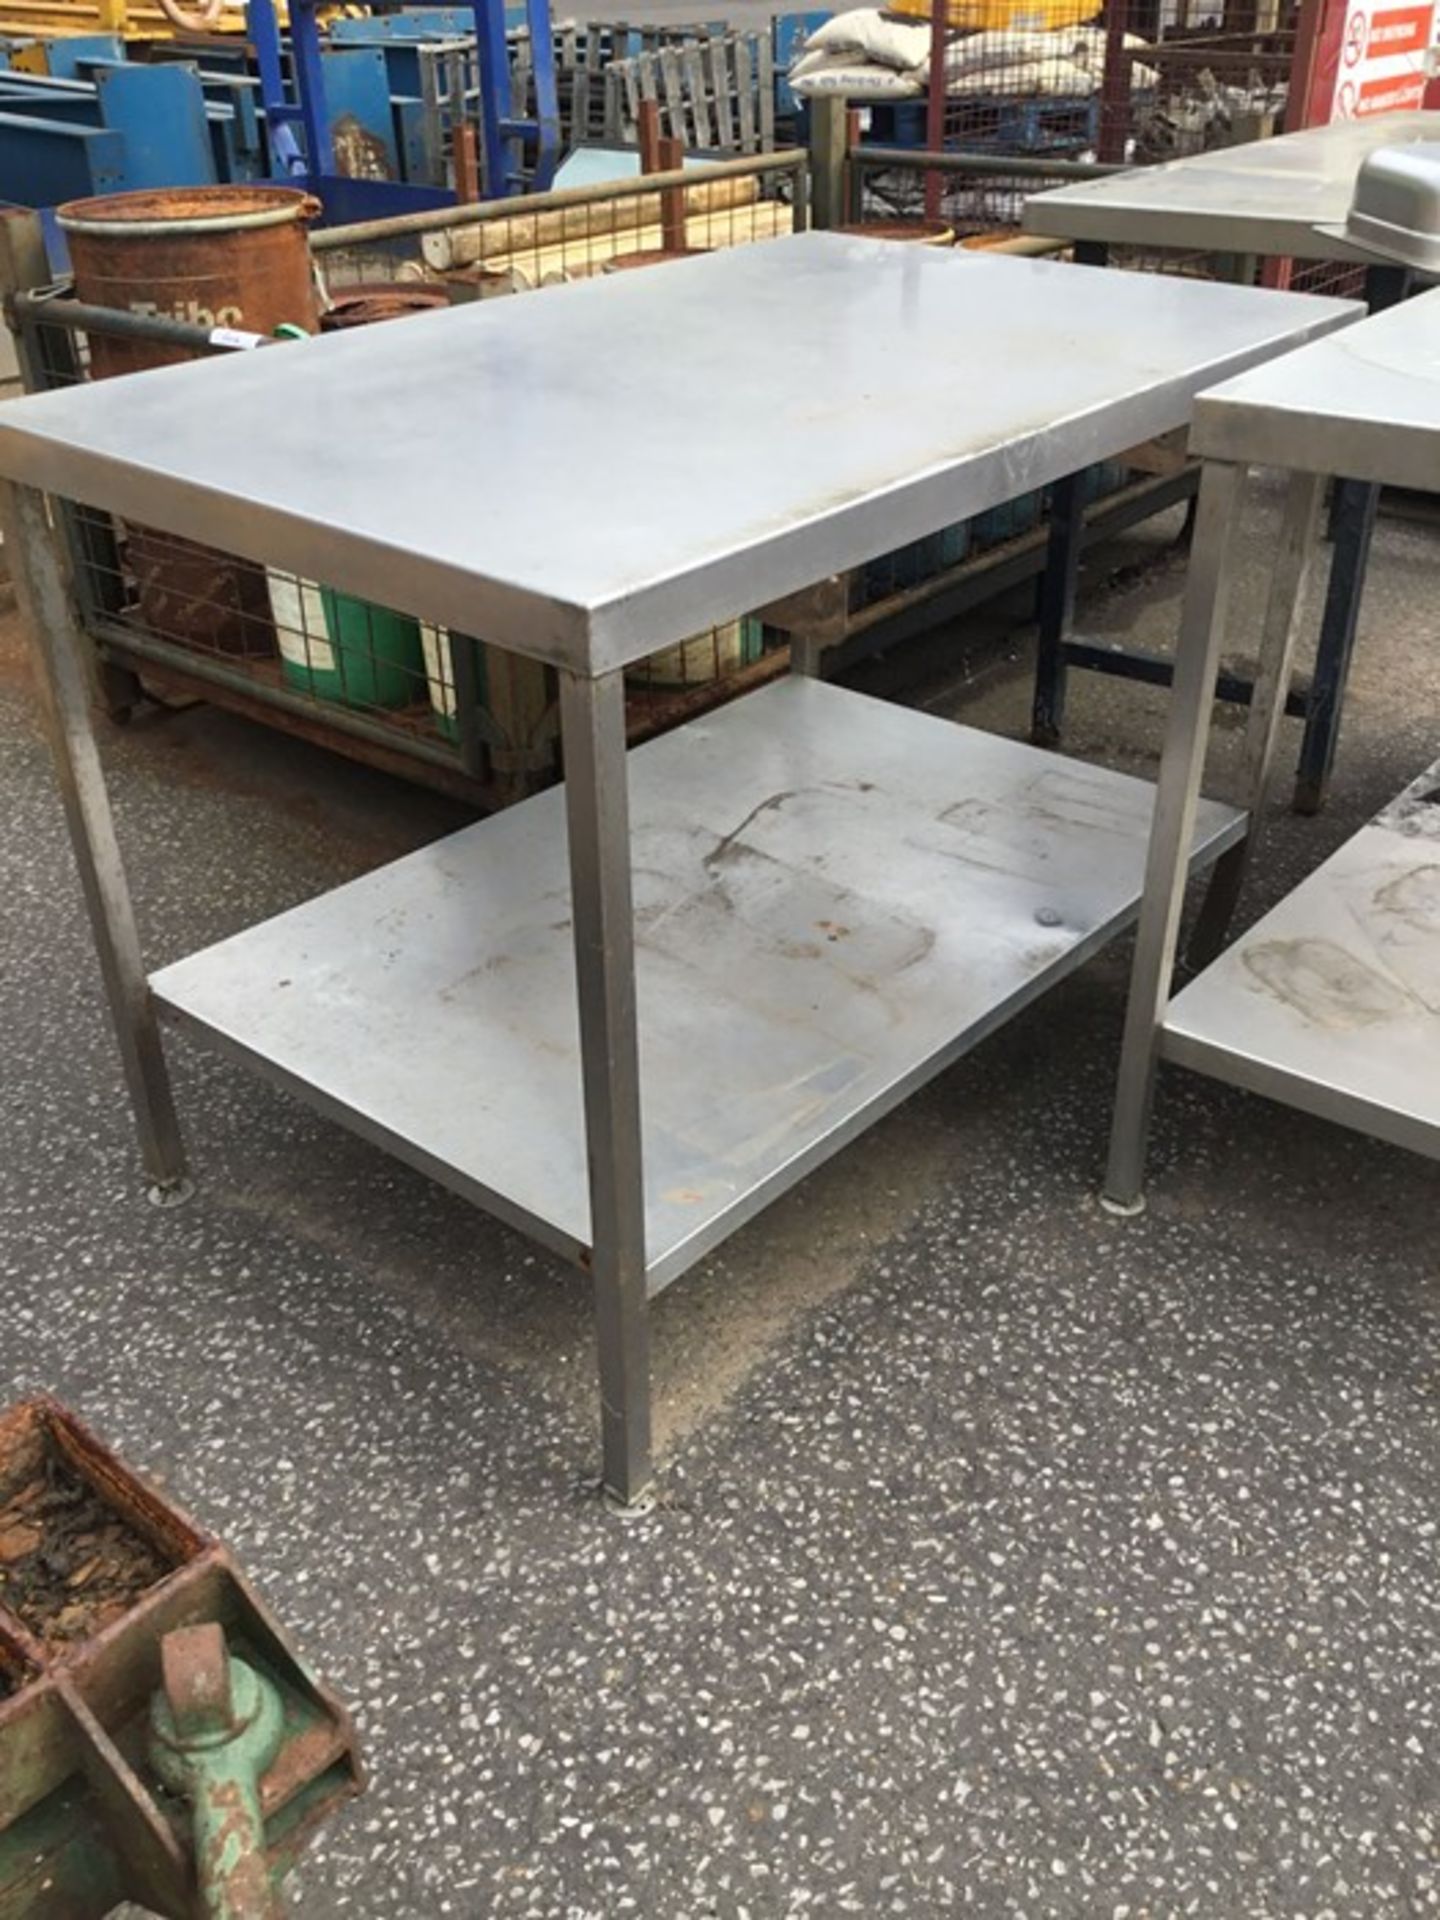 3 stainless steel catering tables